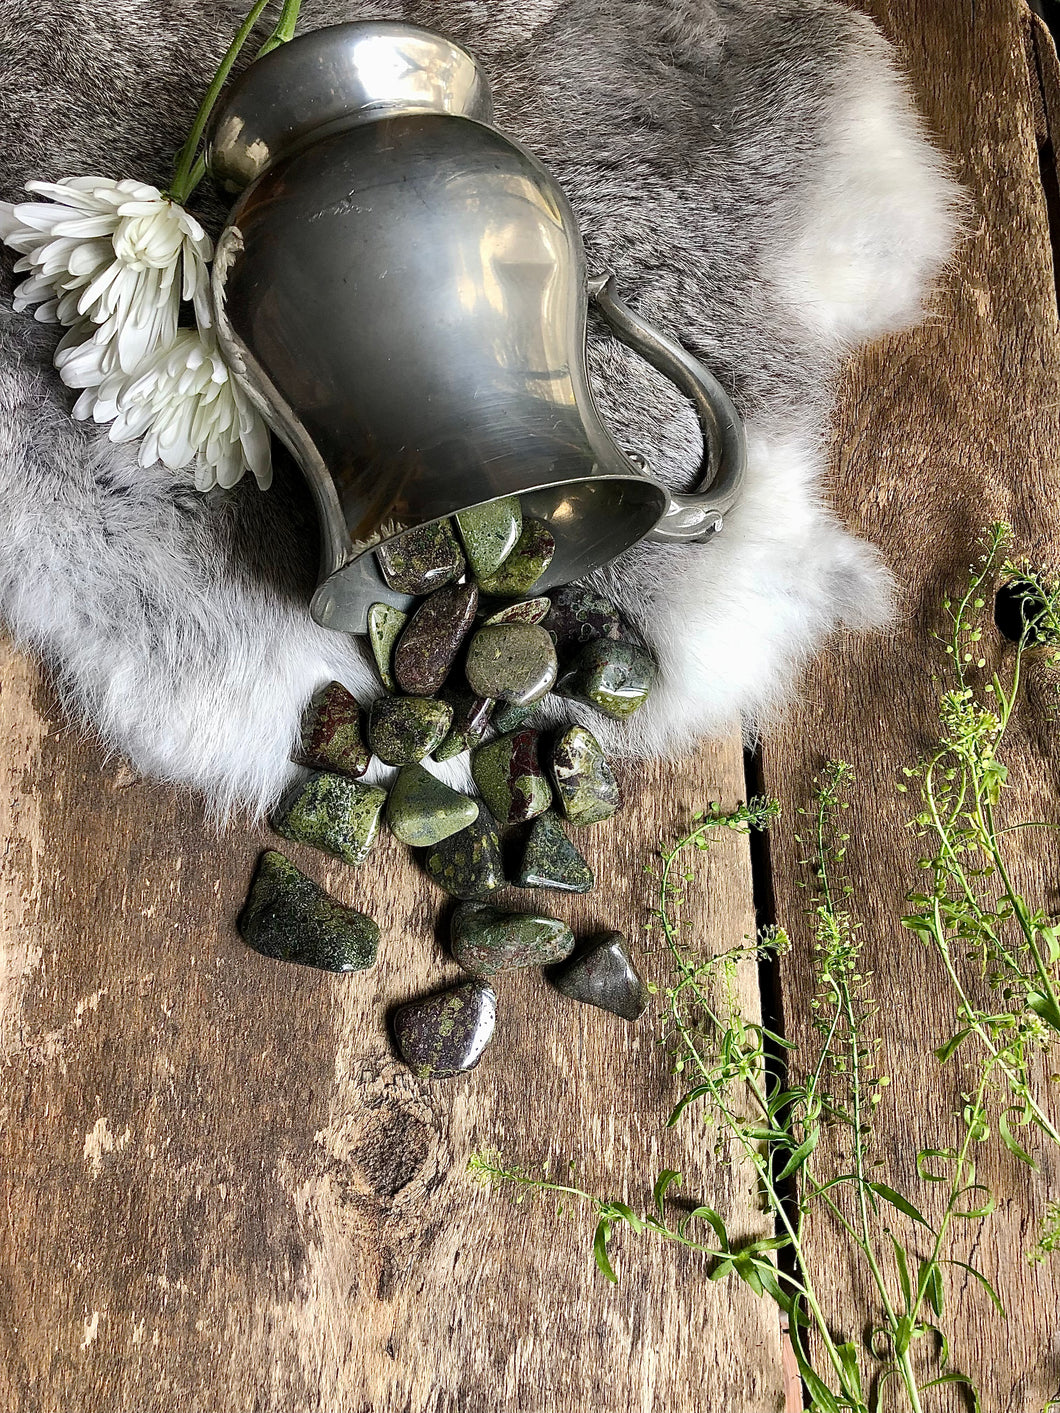 Dragon's Blood tumbled crystals spill out of silver antique gauntlet on top of fur and aged wood, framed with green and white foliage